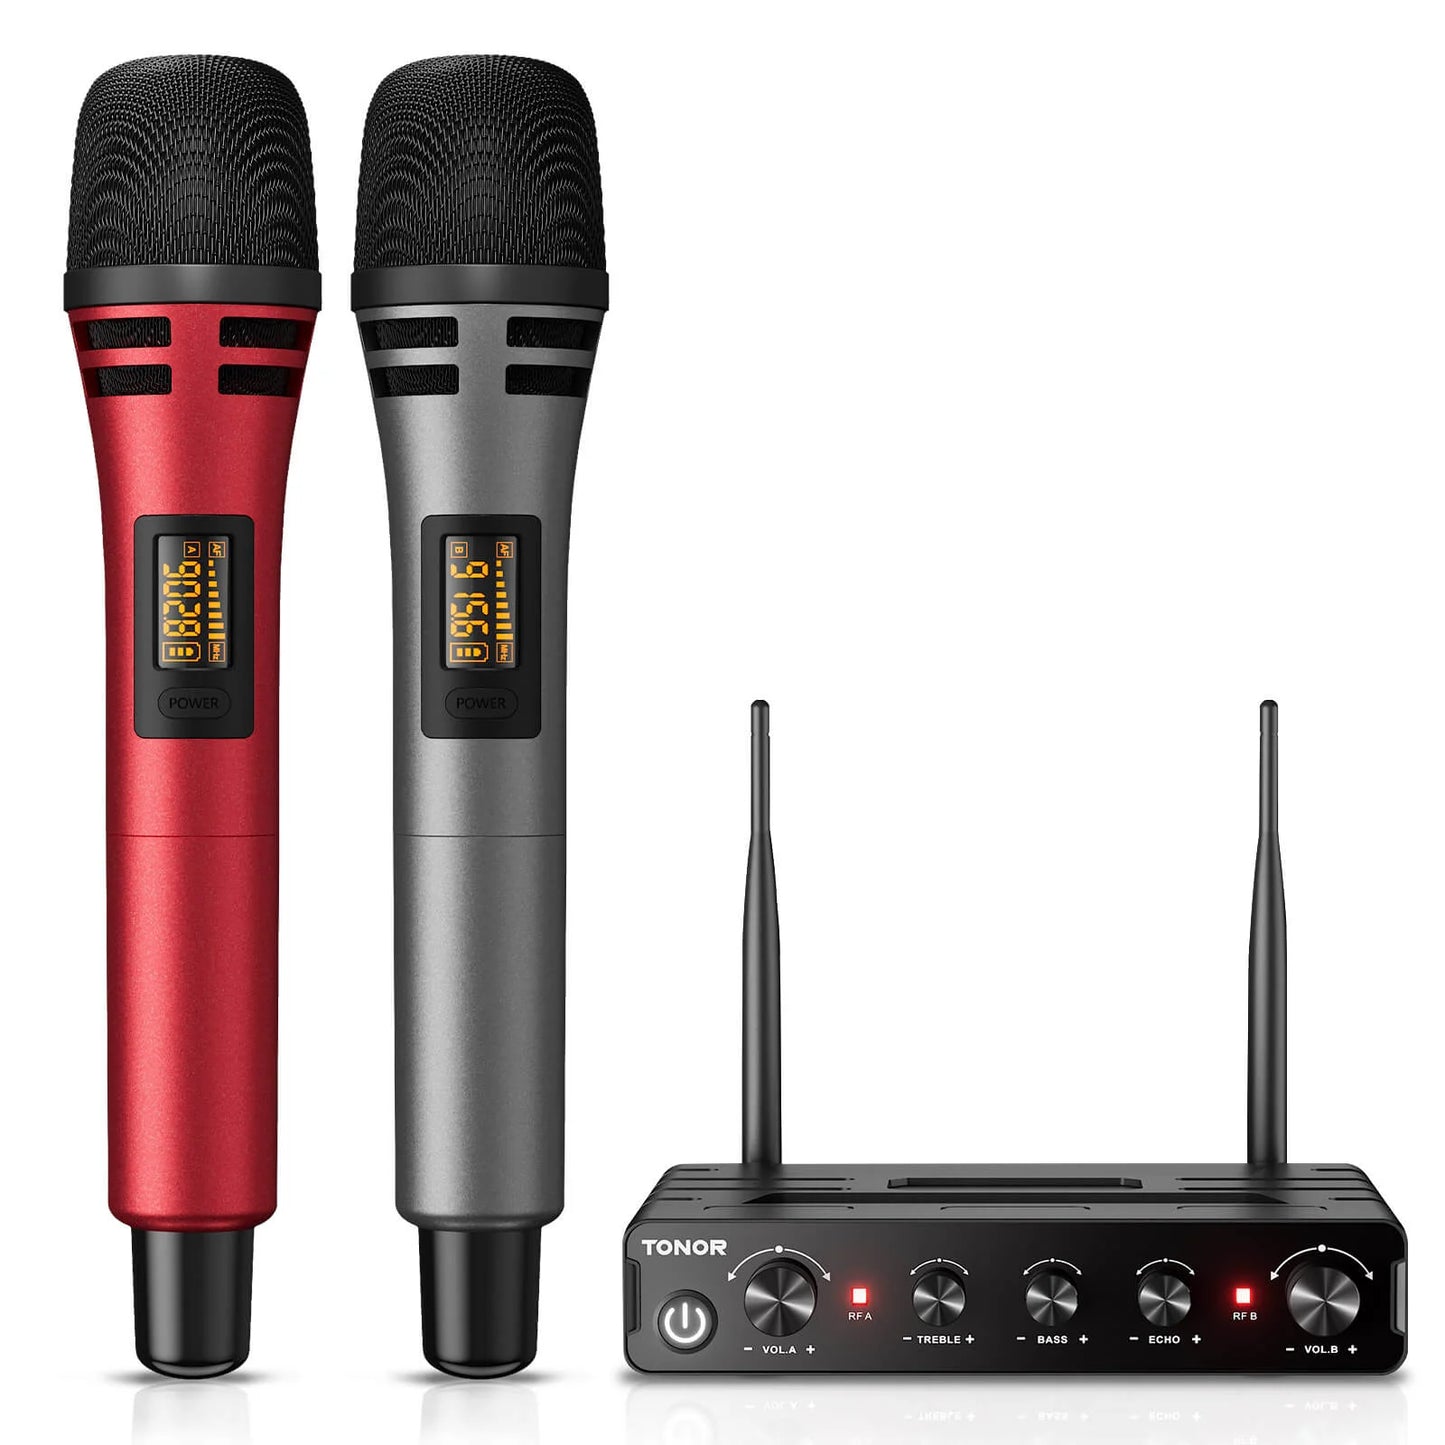 TONOR TW-350 wireless microphone system (two sets)